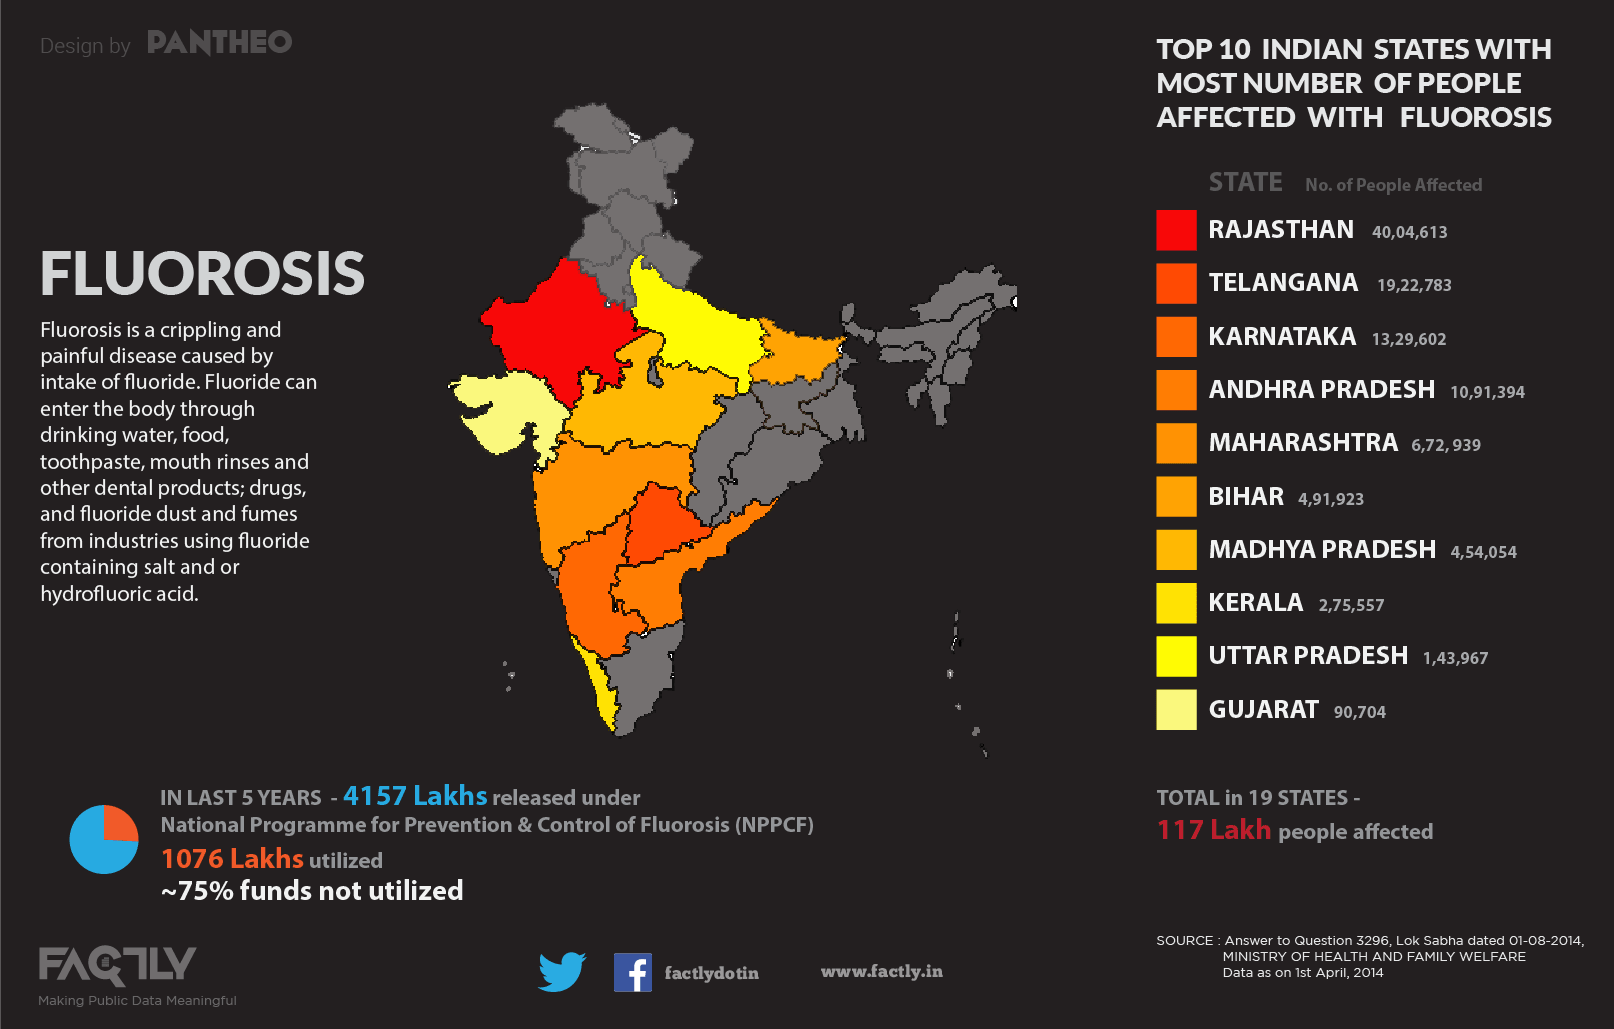 fluorosis in India top 10 indian states most number of people affected Infographic